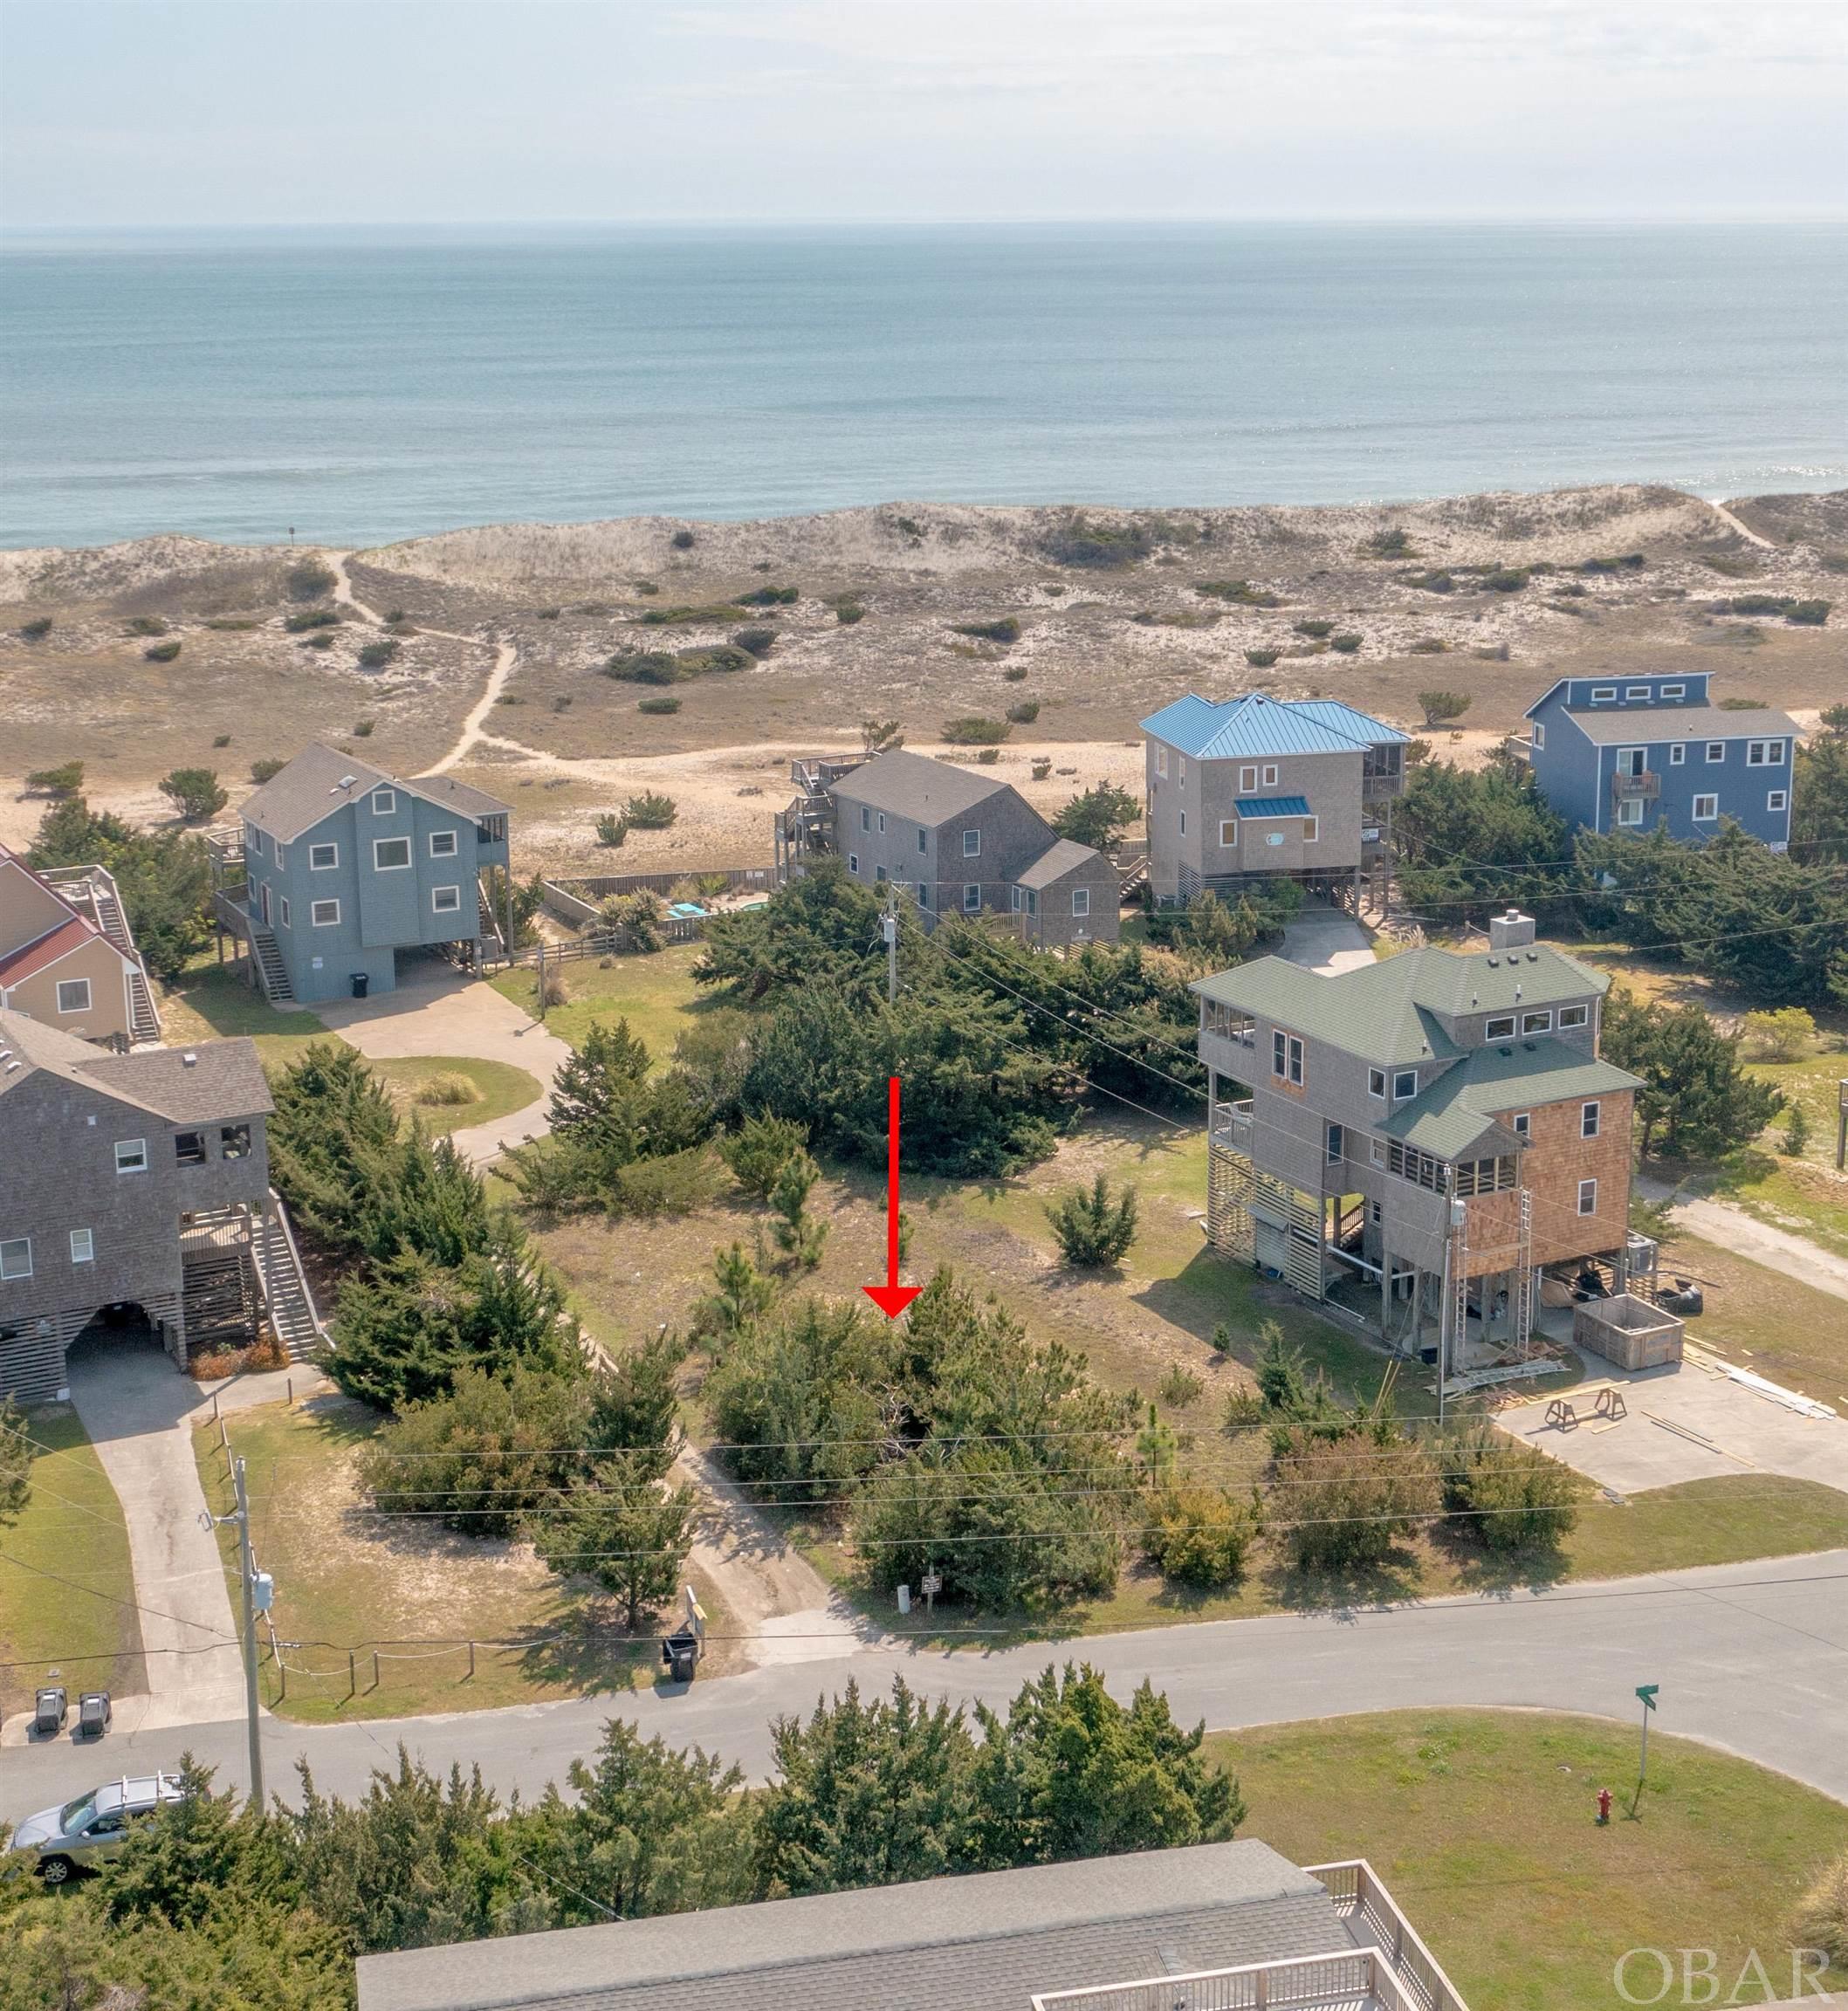 There are not many semi-oceanfront lots left on Hatteras Island and this is a great opportunity to be in Hatteras Colony Subdivision and behind a very stable dune line.  Salvo and the Tri-Village offers several restaurants, surf shops, and amenities plus sound access at the Salvo Day Use Area. This could be your dream home location!